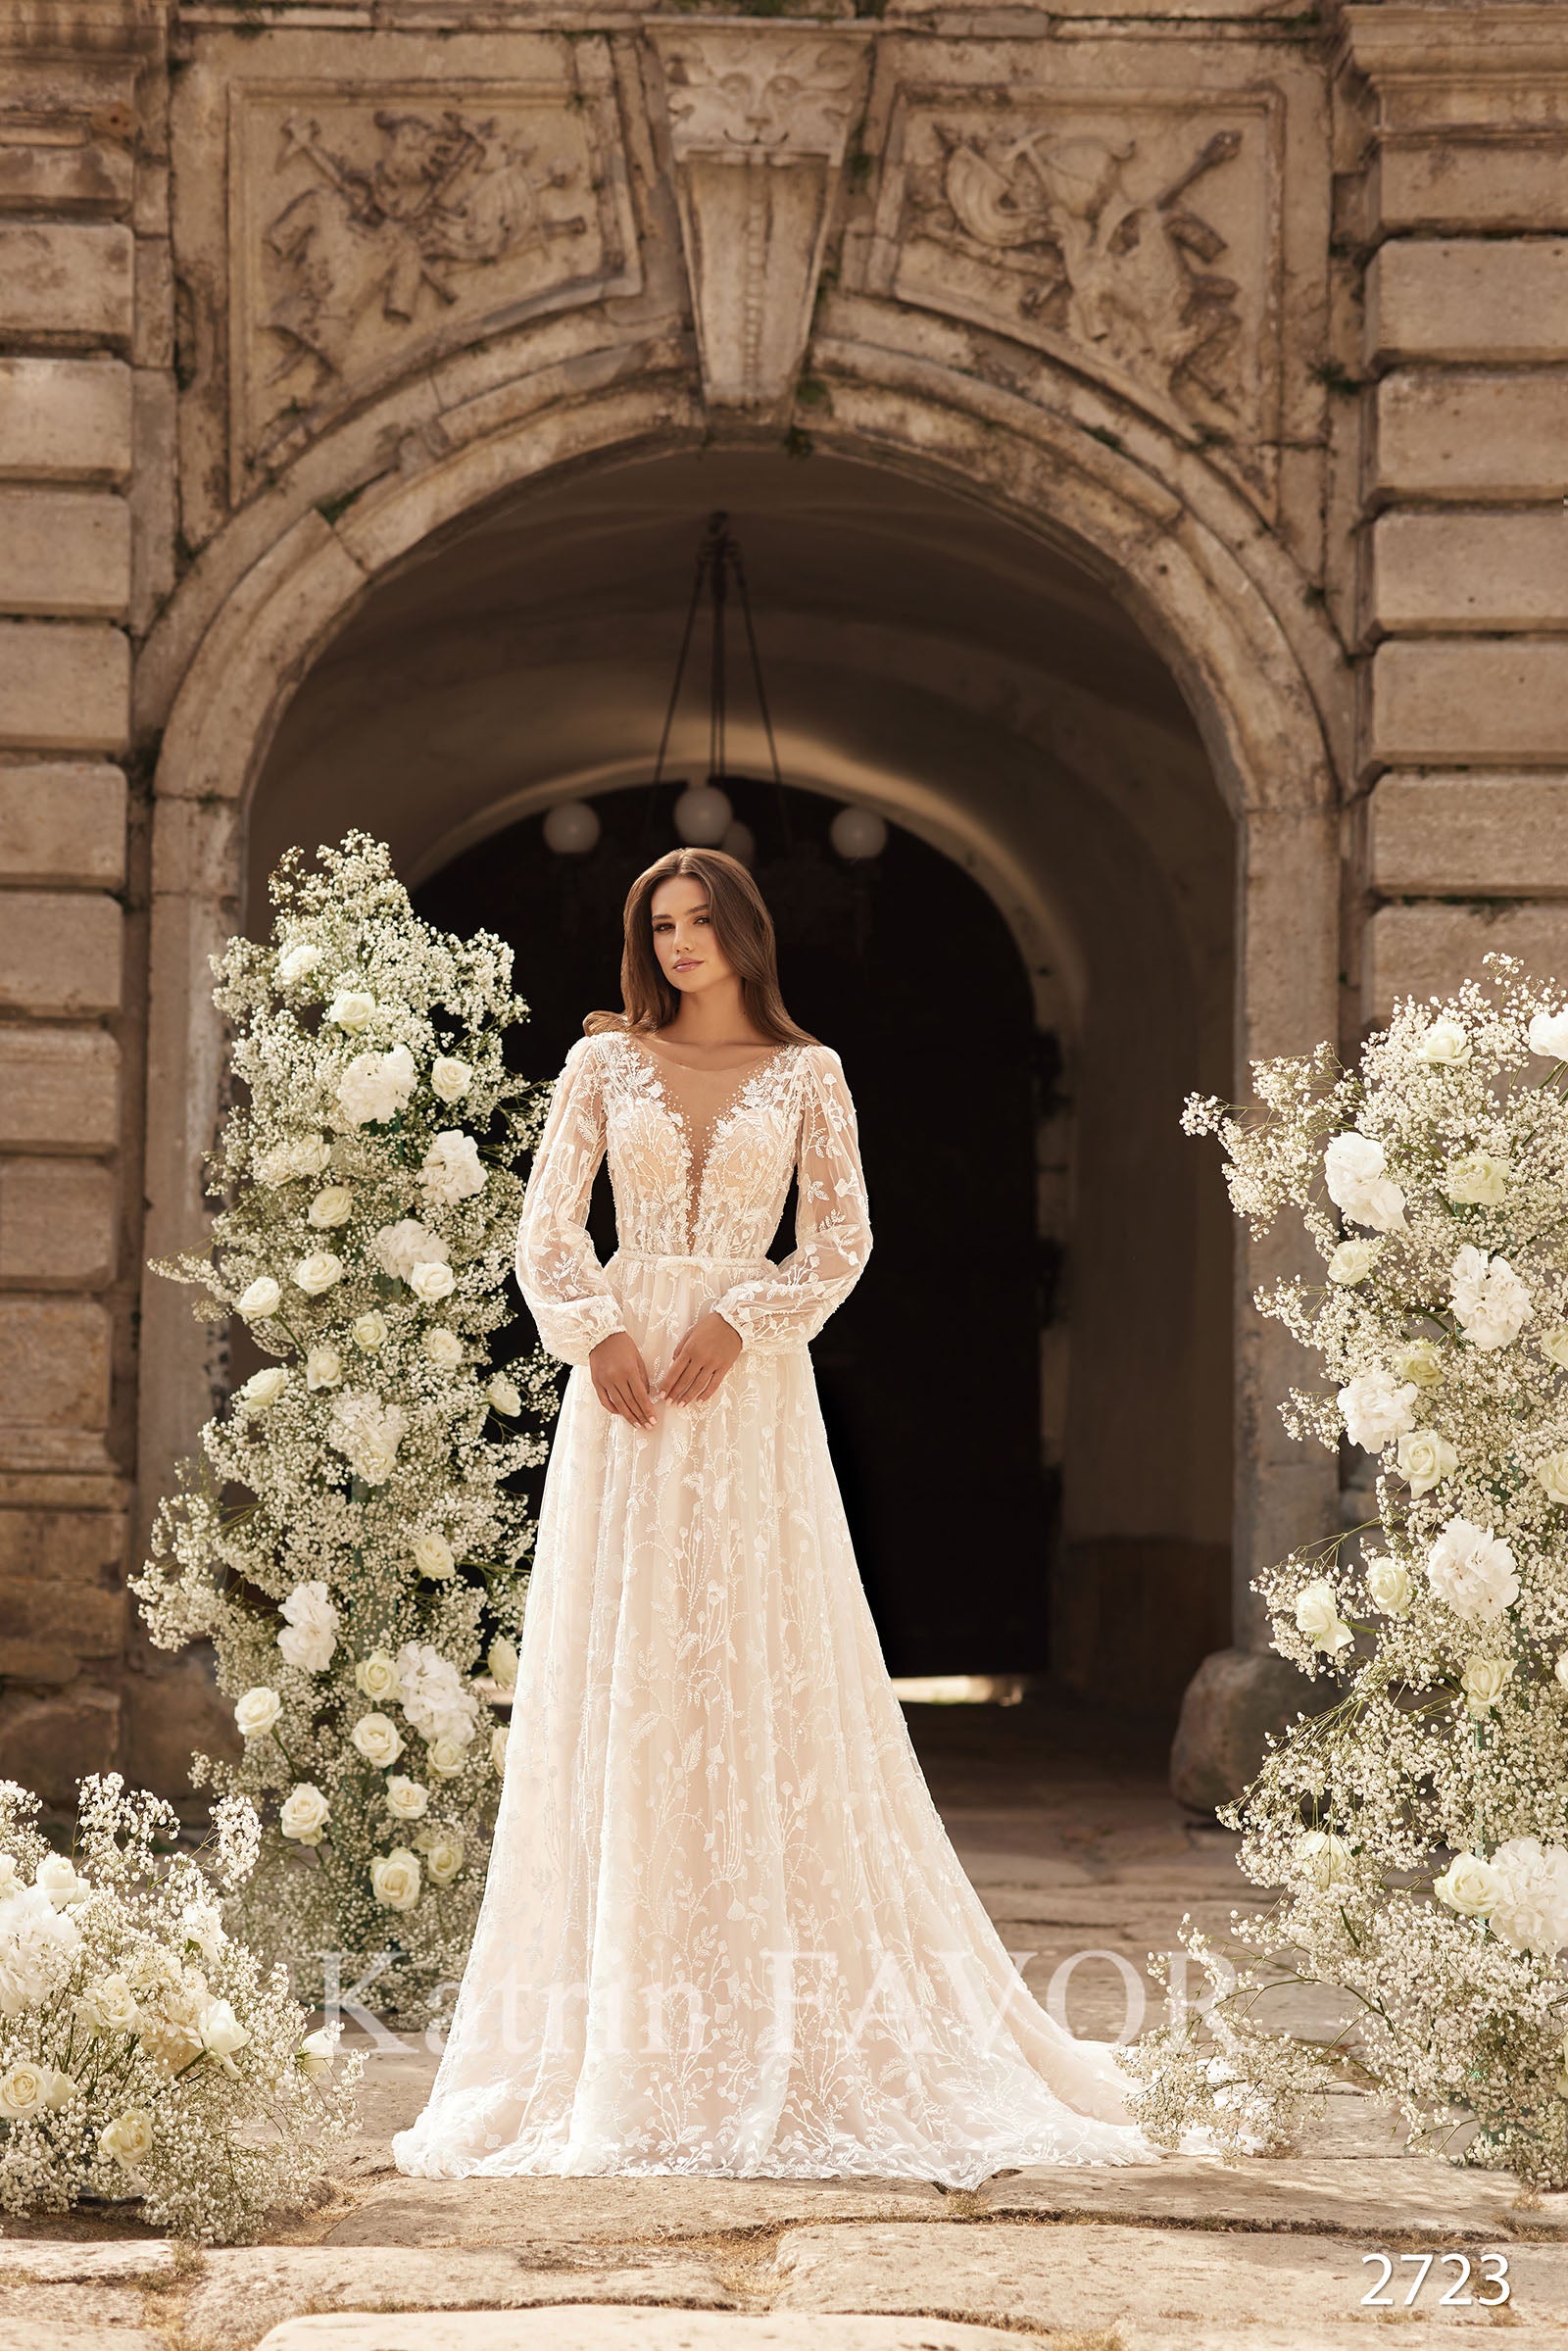 KatrinFAVORboutique-Floral embroidered wedding dress with sleeves